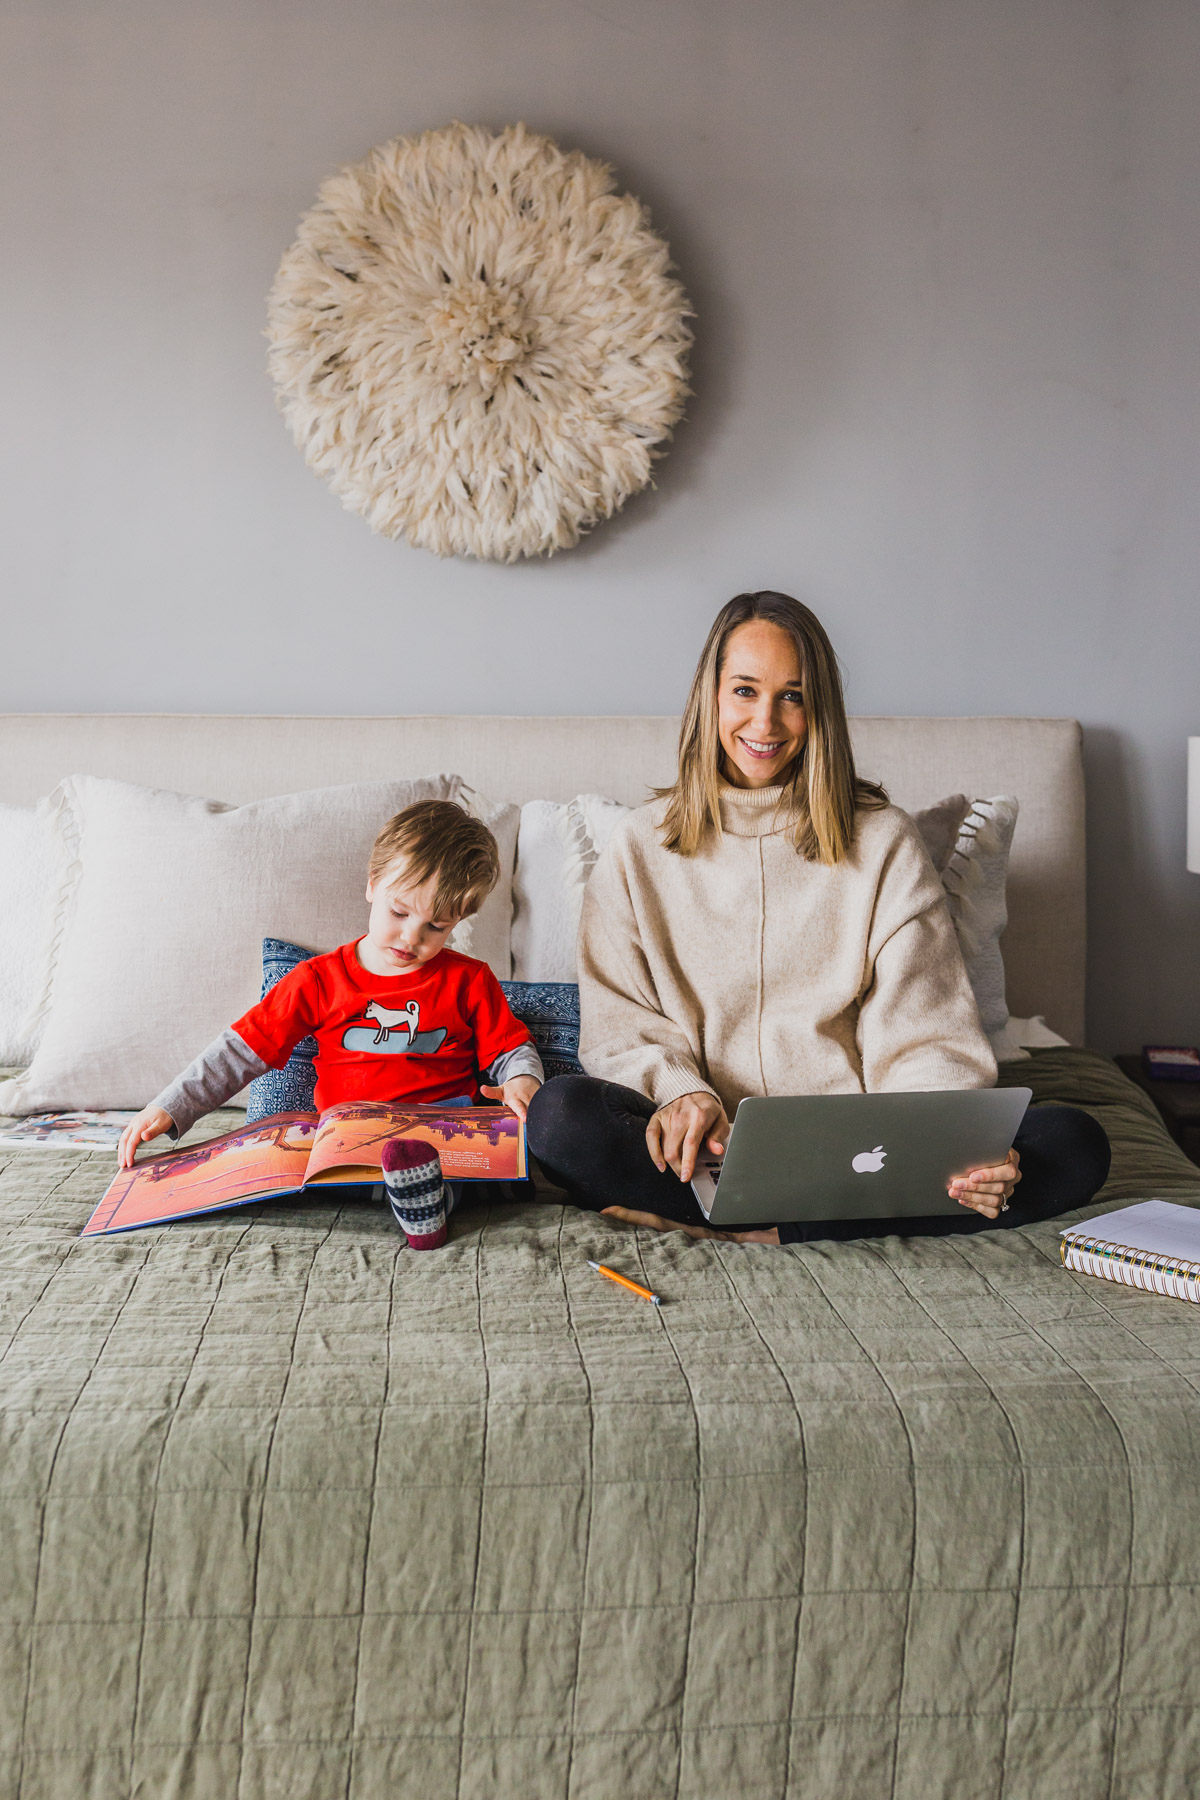 I'm sharing my productive day routine and work from home tips for moms with toddlers. This work at home toddler mom schedule highlights how to block schedule time, easy indoor toddler activities to burn energy, our screen times rules and how to have a productive nap times. Balancing mom life with a job at home is tough, but not impossible, click through for parenting hacks and my work from home schedule. #workfromhomemom #toddleractivities